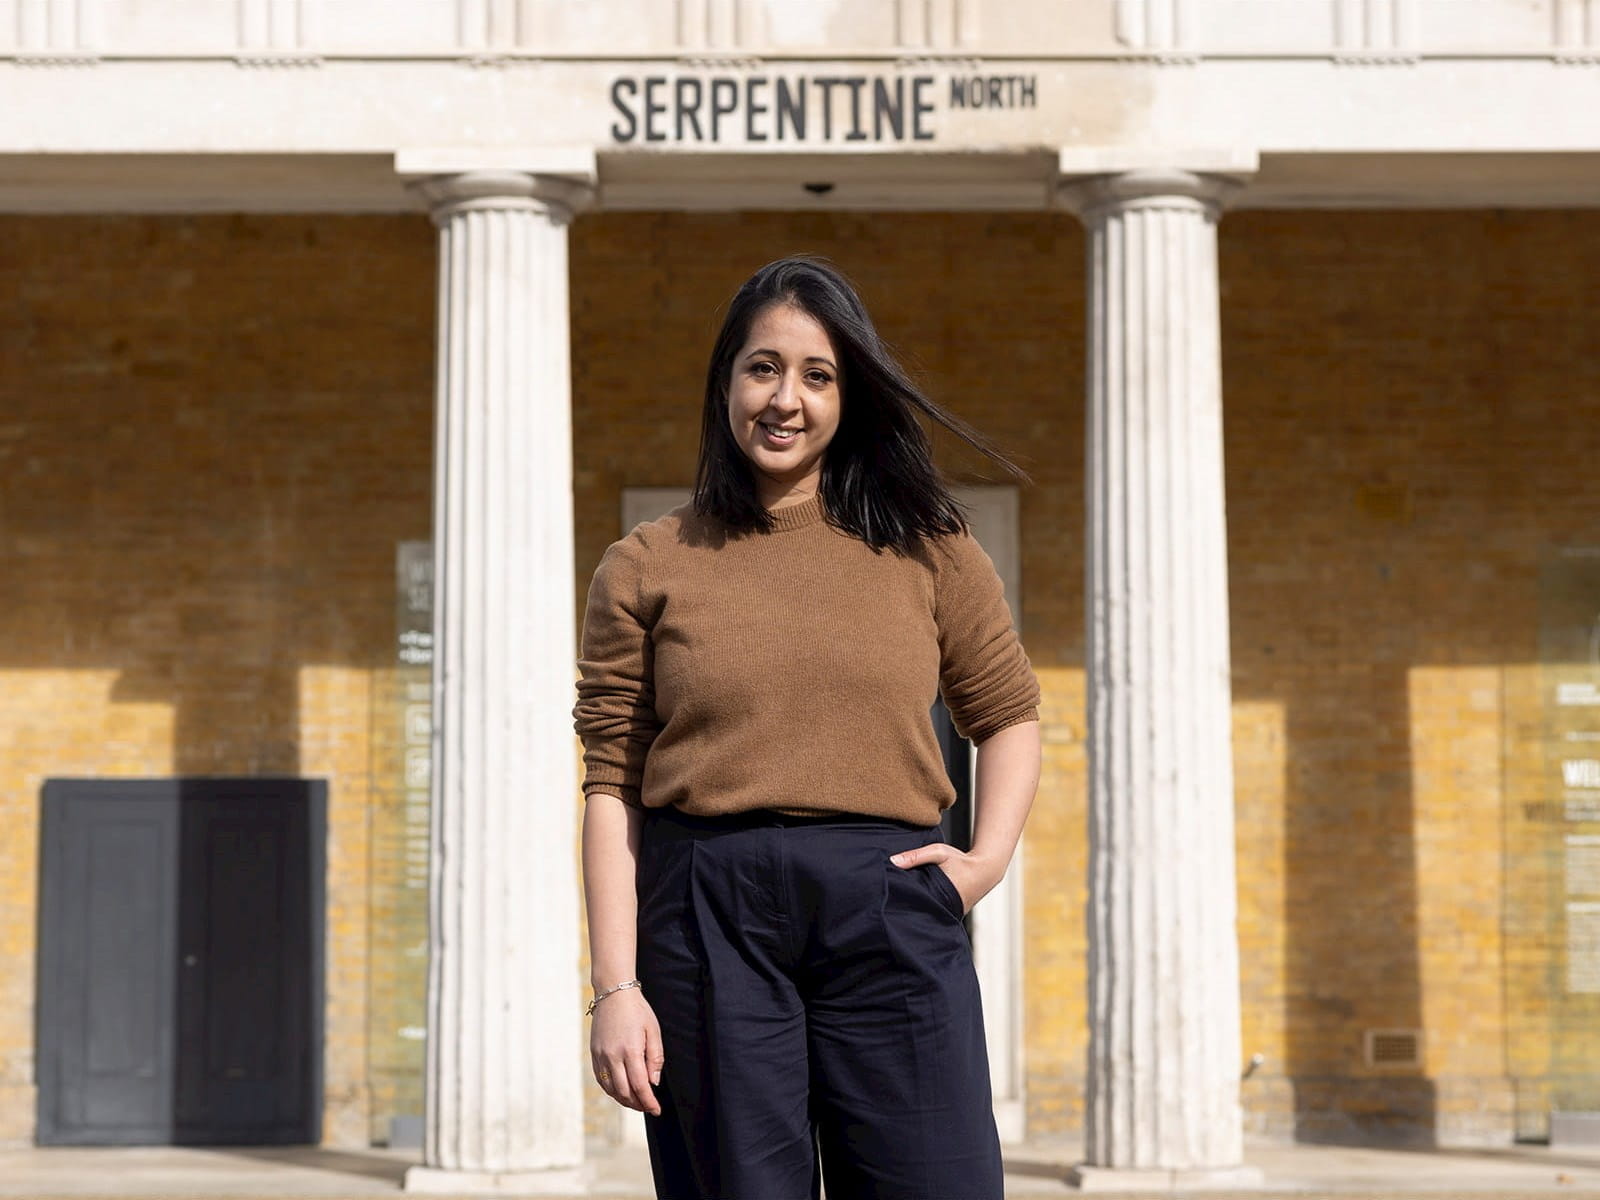 Alina Cummins, Head of Finance at Serpentine, young woman standing in front of Serpentine building columns north